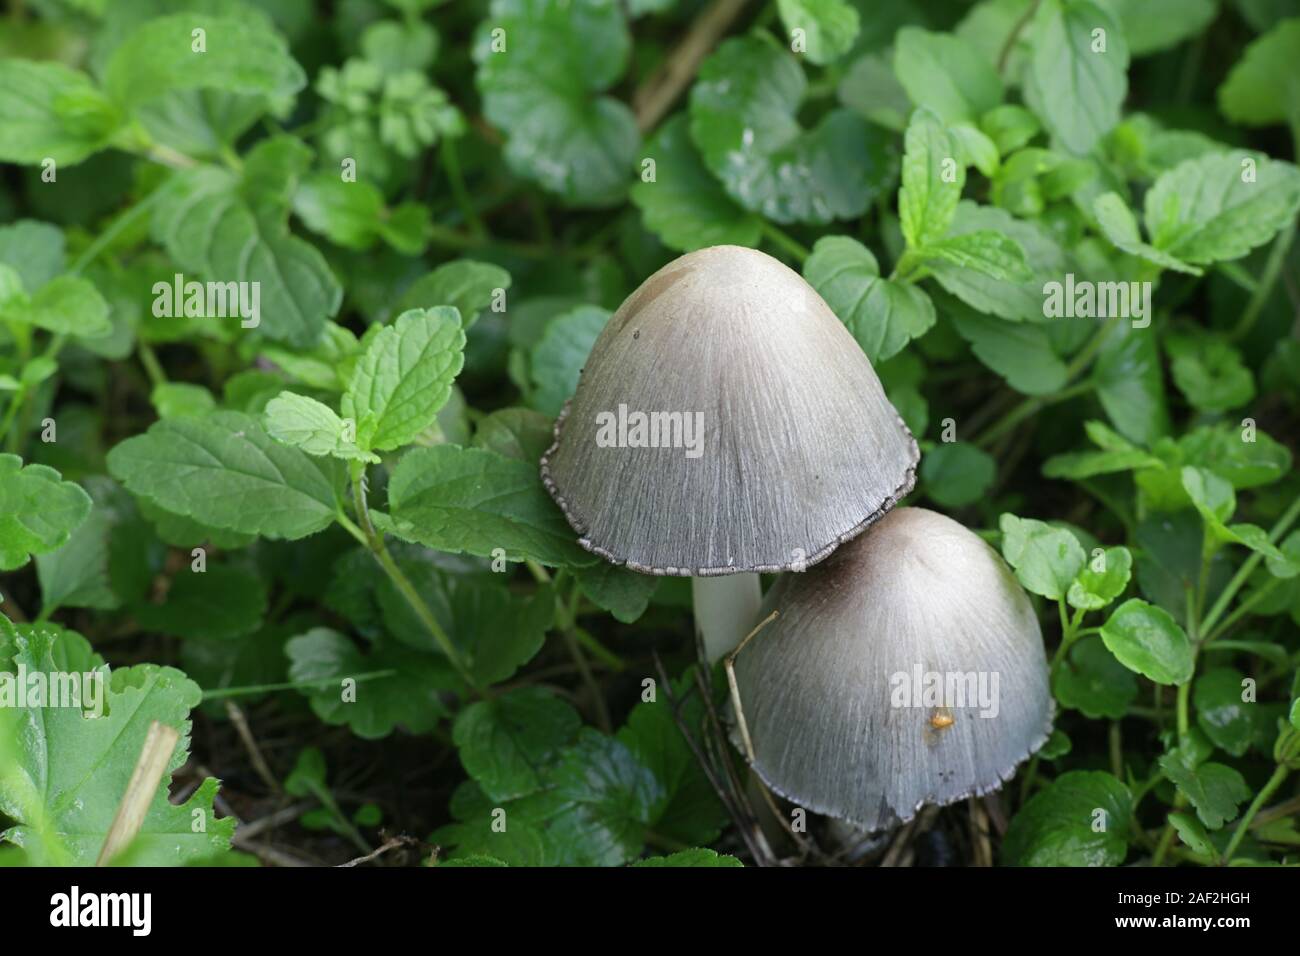 Coprinopsis atramentaria, known as the common ink cap, inky cap or tippler's bane, wild edible mushrooms from Finland Stock Photo